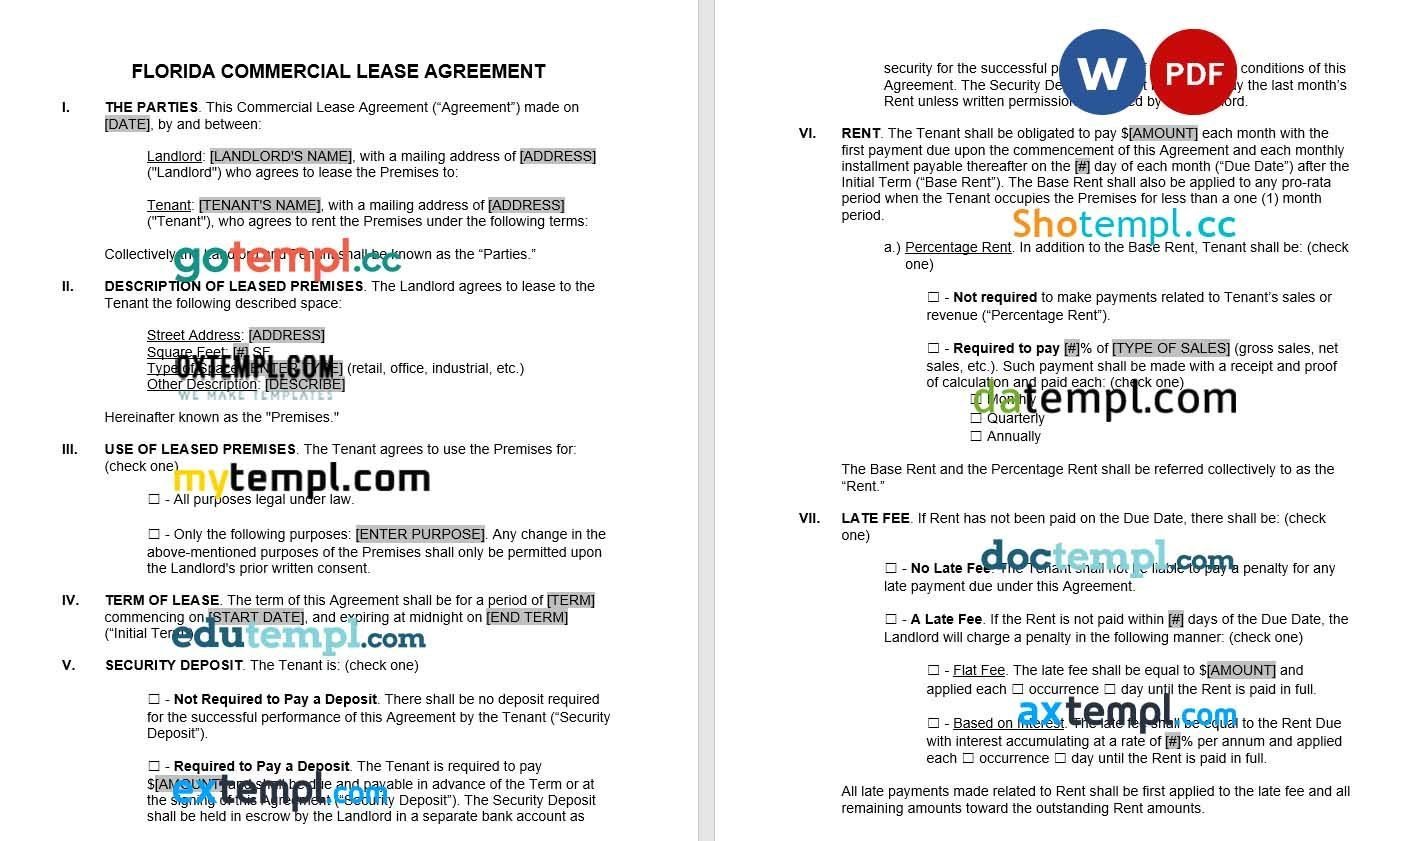 Florida Commercial Lease Agreement Word example, fully editable